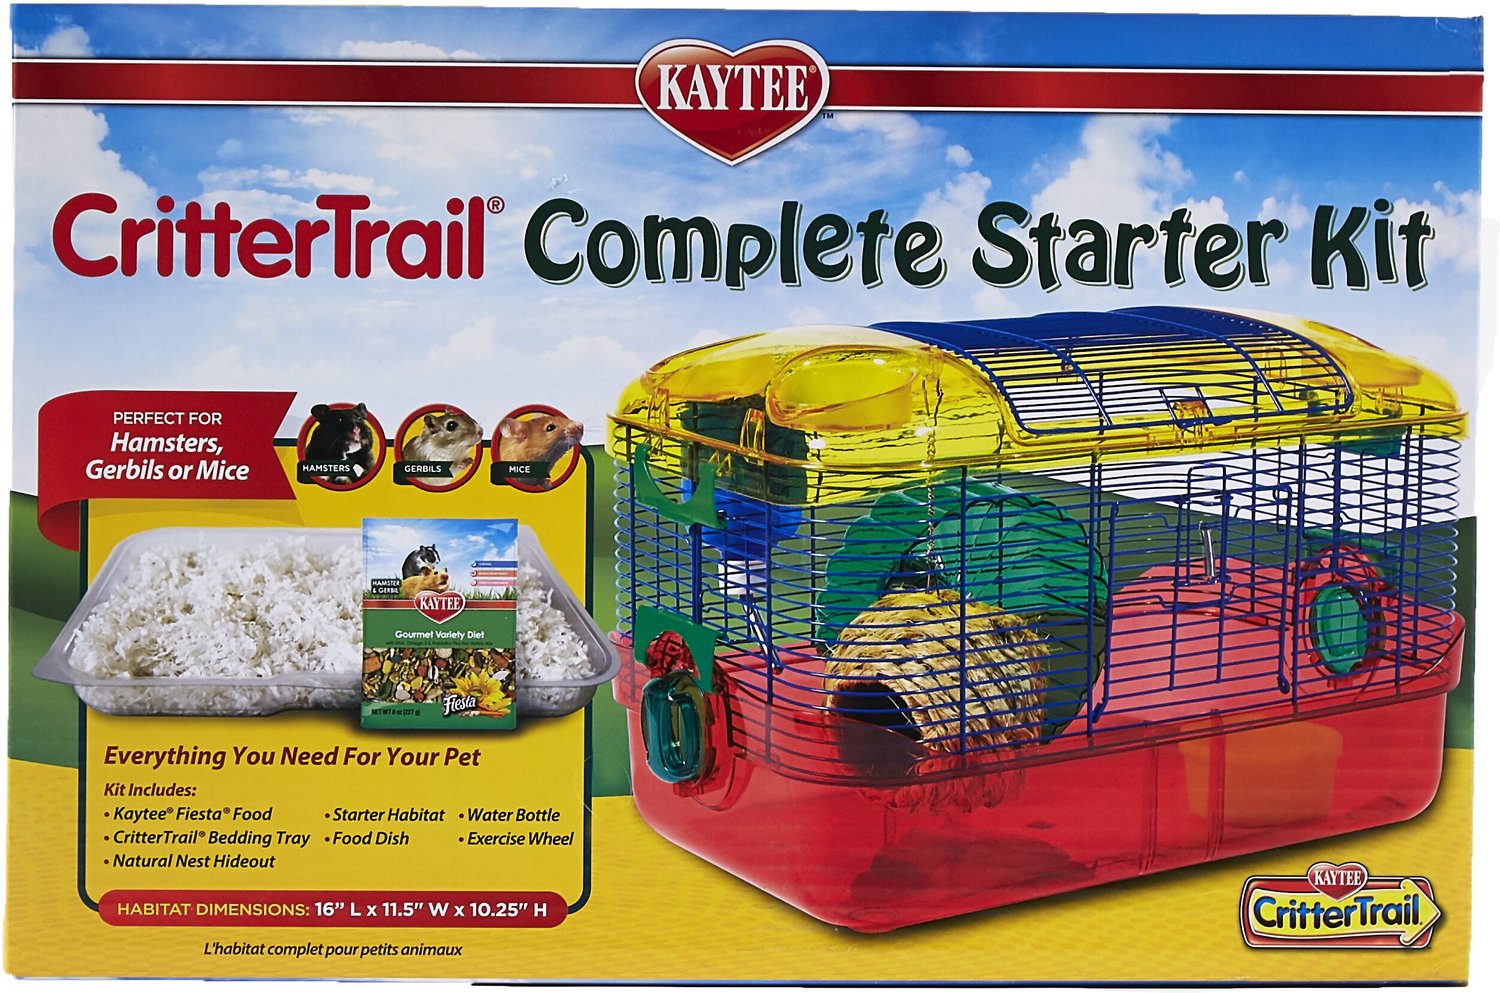 Kaytee CritterTrail Small Animal Habitat Bedding Clean cage recyclable Tray